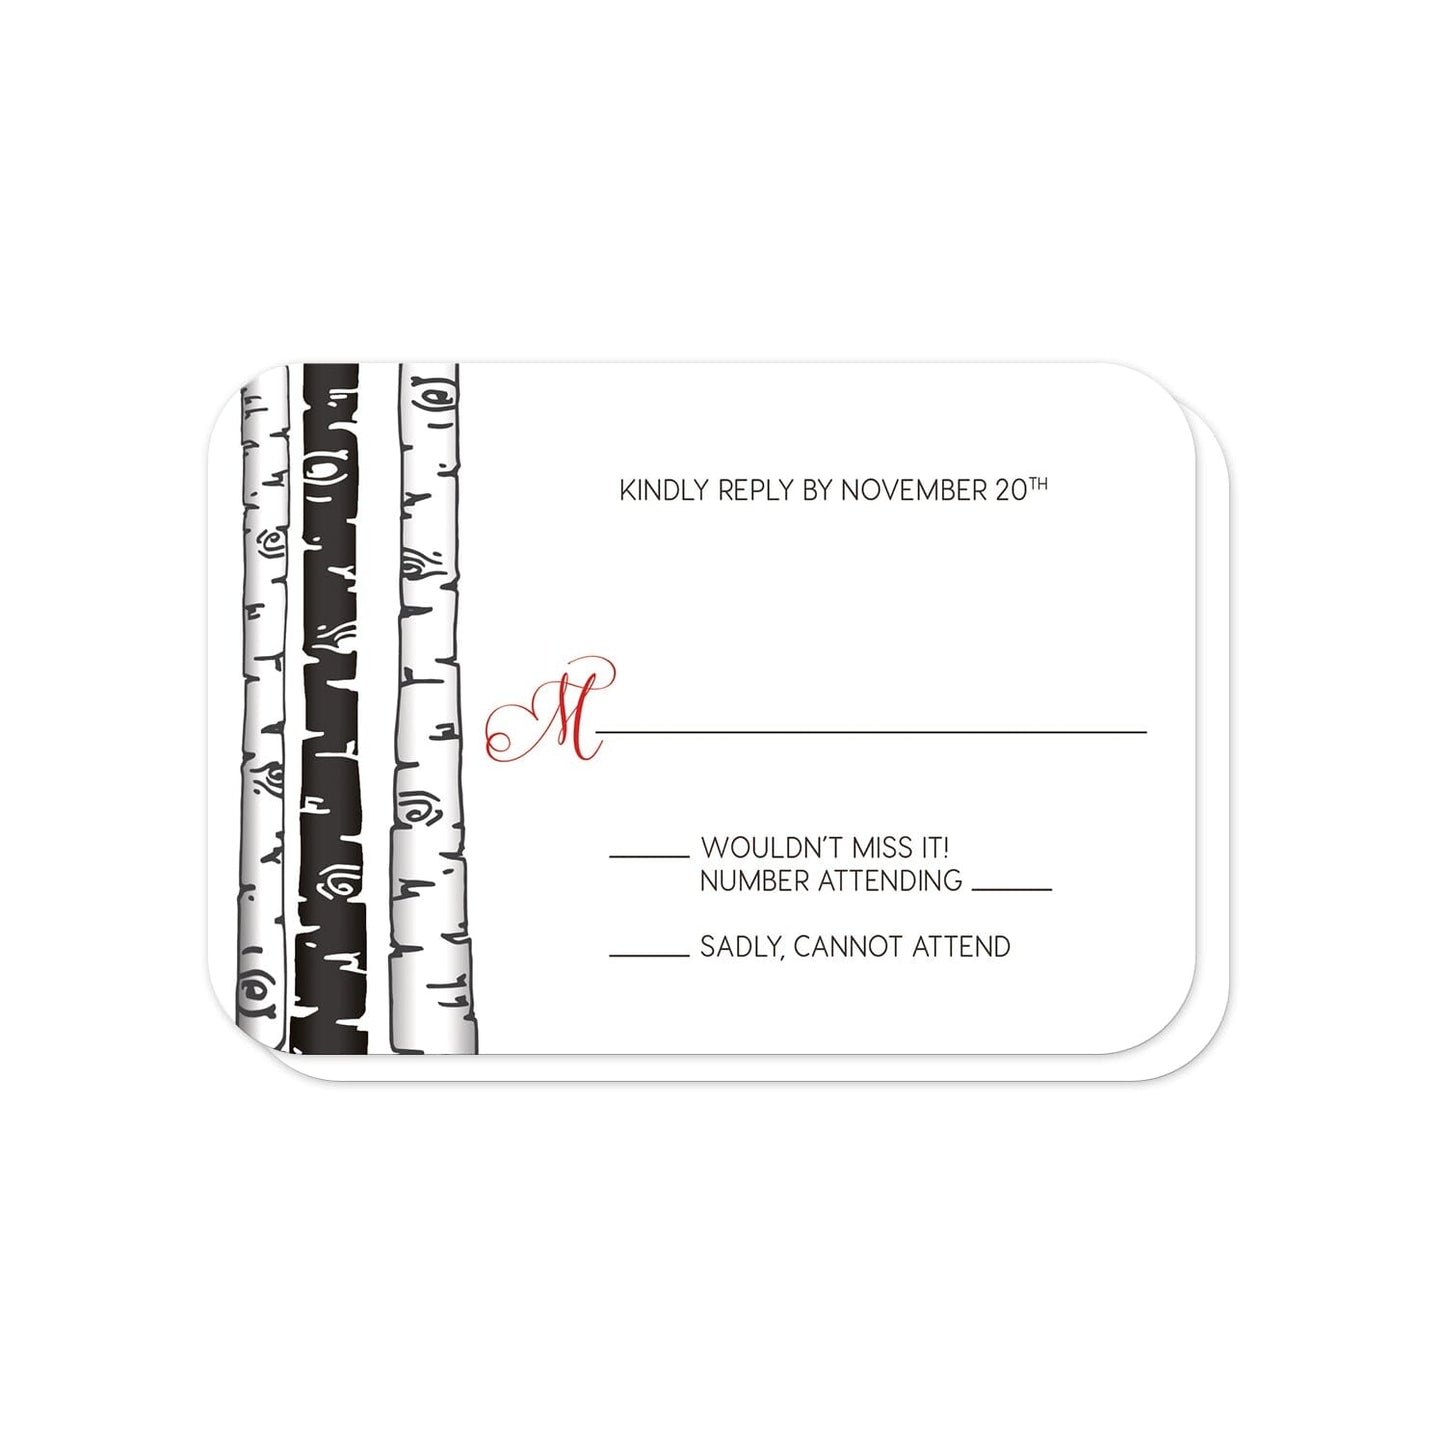 Monochrome Birch Tree with Red RSVP Cards (with rounded corners) at Artistically Invited.